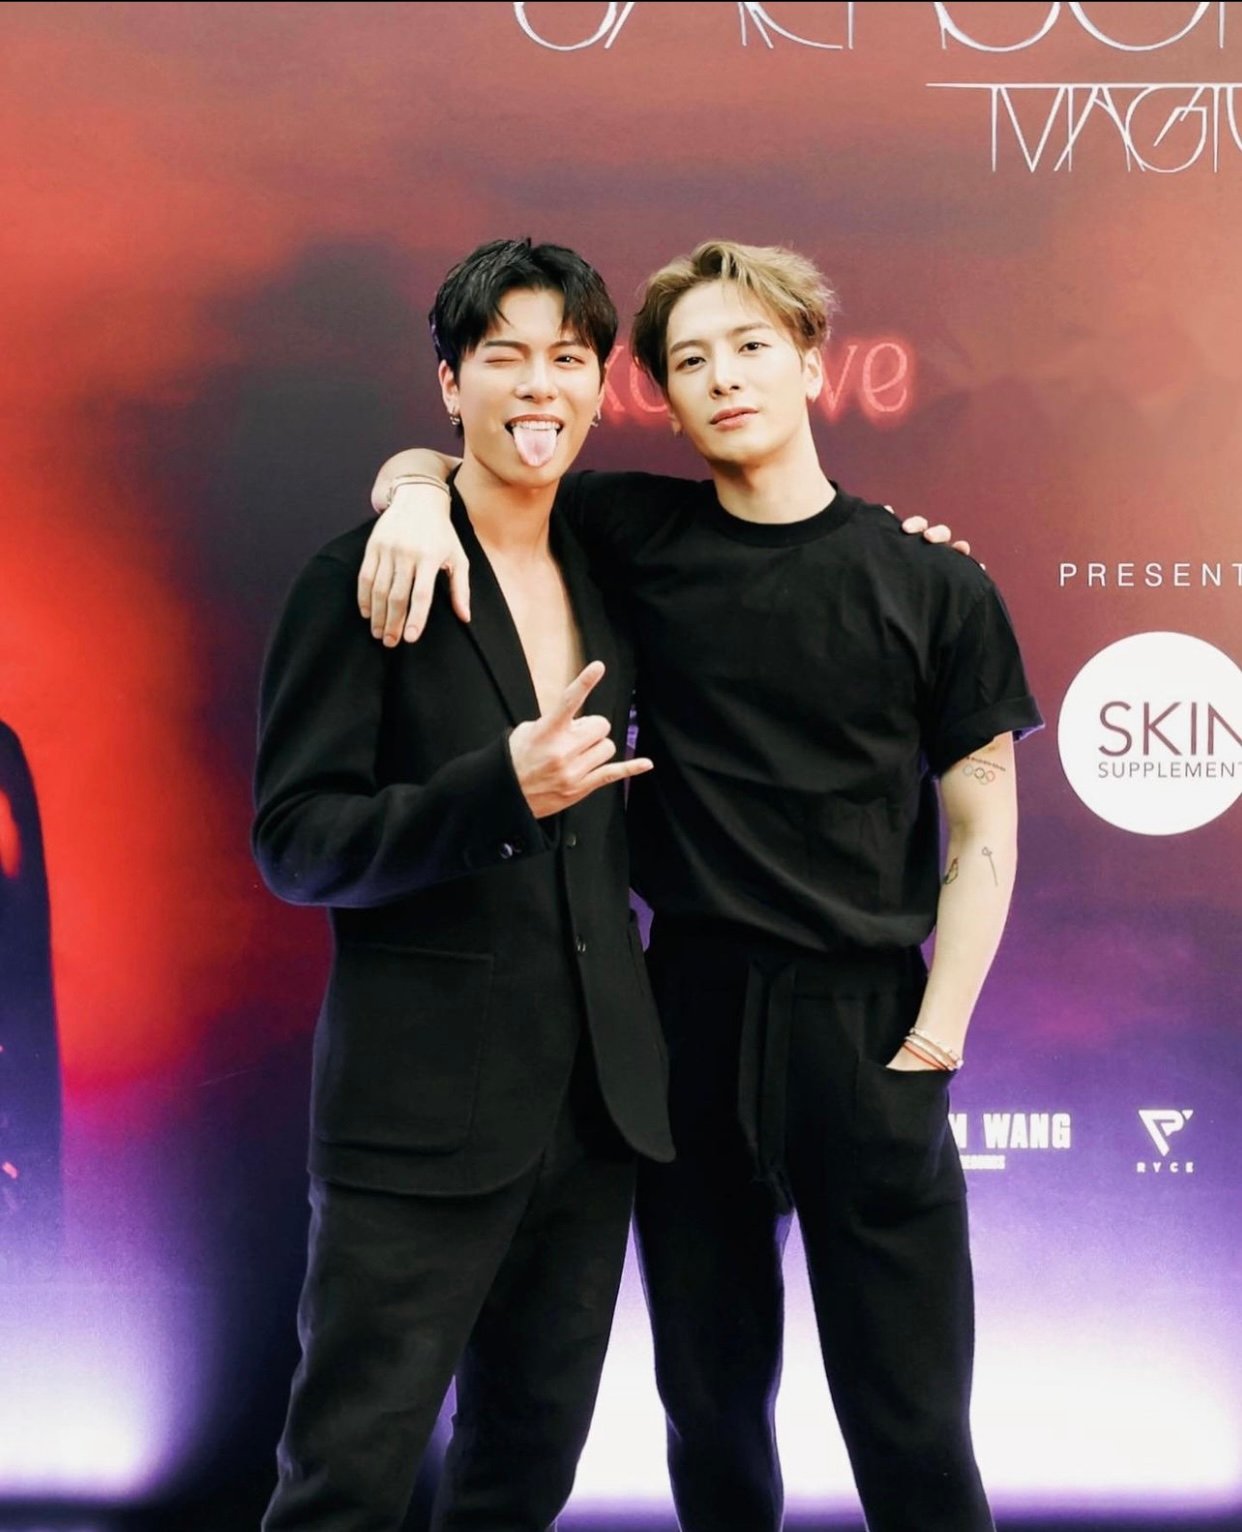 Jackson Wang Specifically Asked to Party With S'pore Actor Glenn